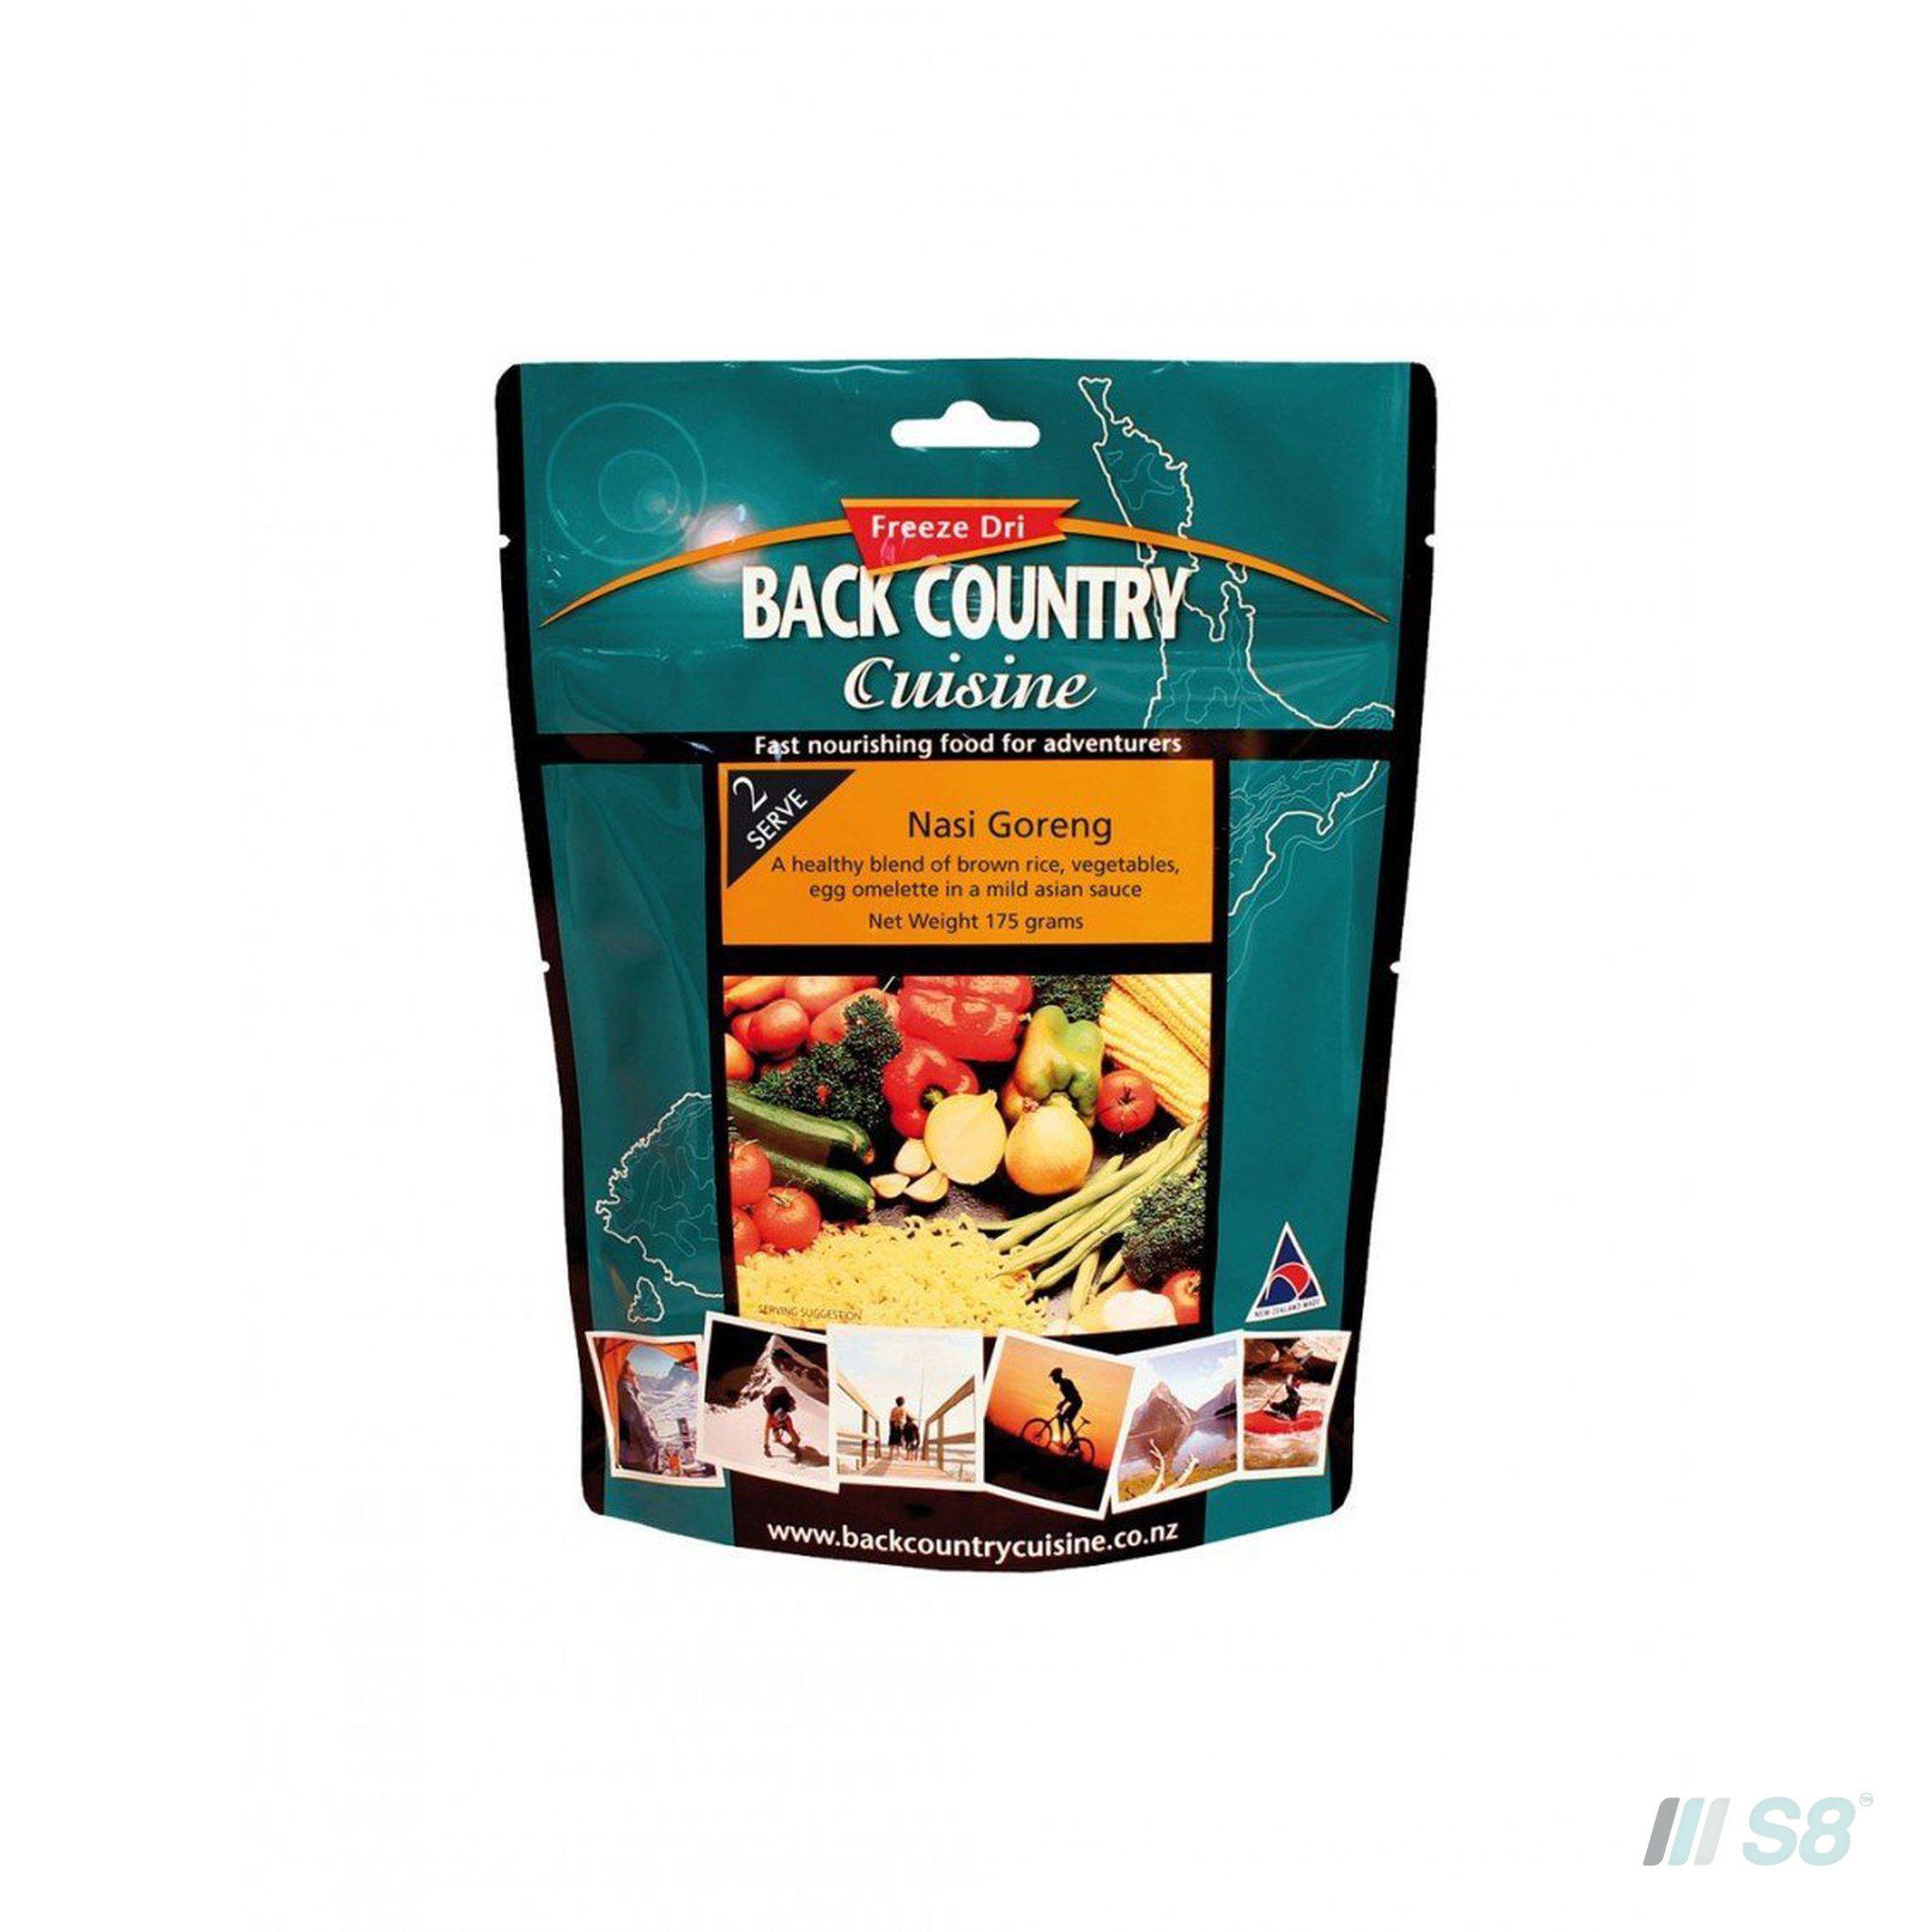 Back Country Cuisine Nasi Goreng-BCC-S8 Products Group